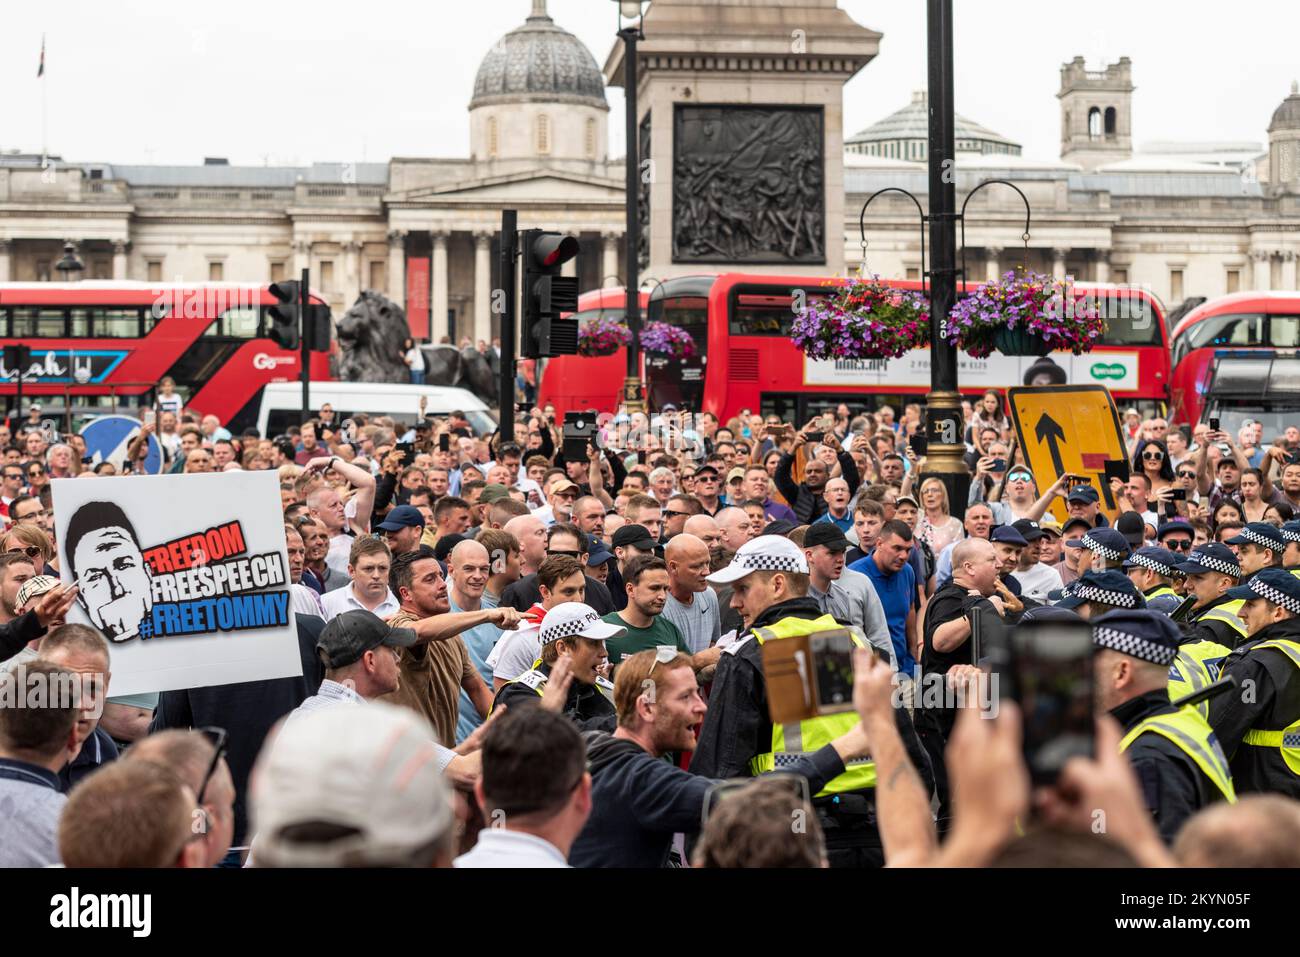 Supporters of Tommy Robinson, such as the EDL, protested in London demonstrating for his release after arrest. Police trying to block from Whitehall Stock Photo